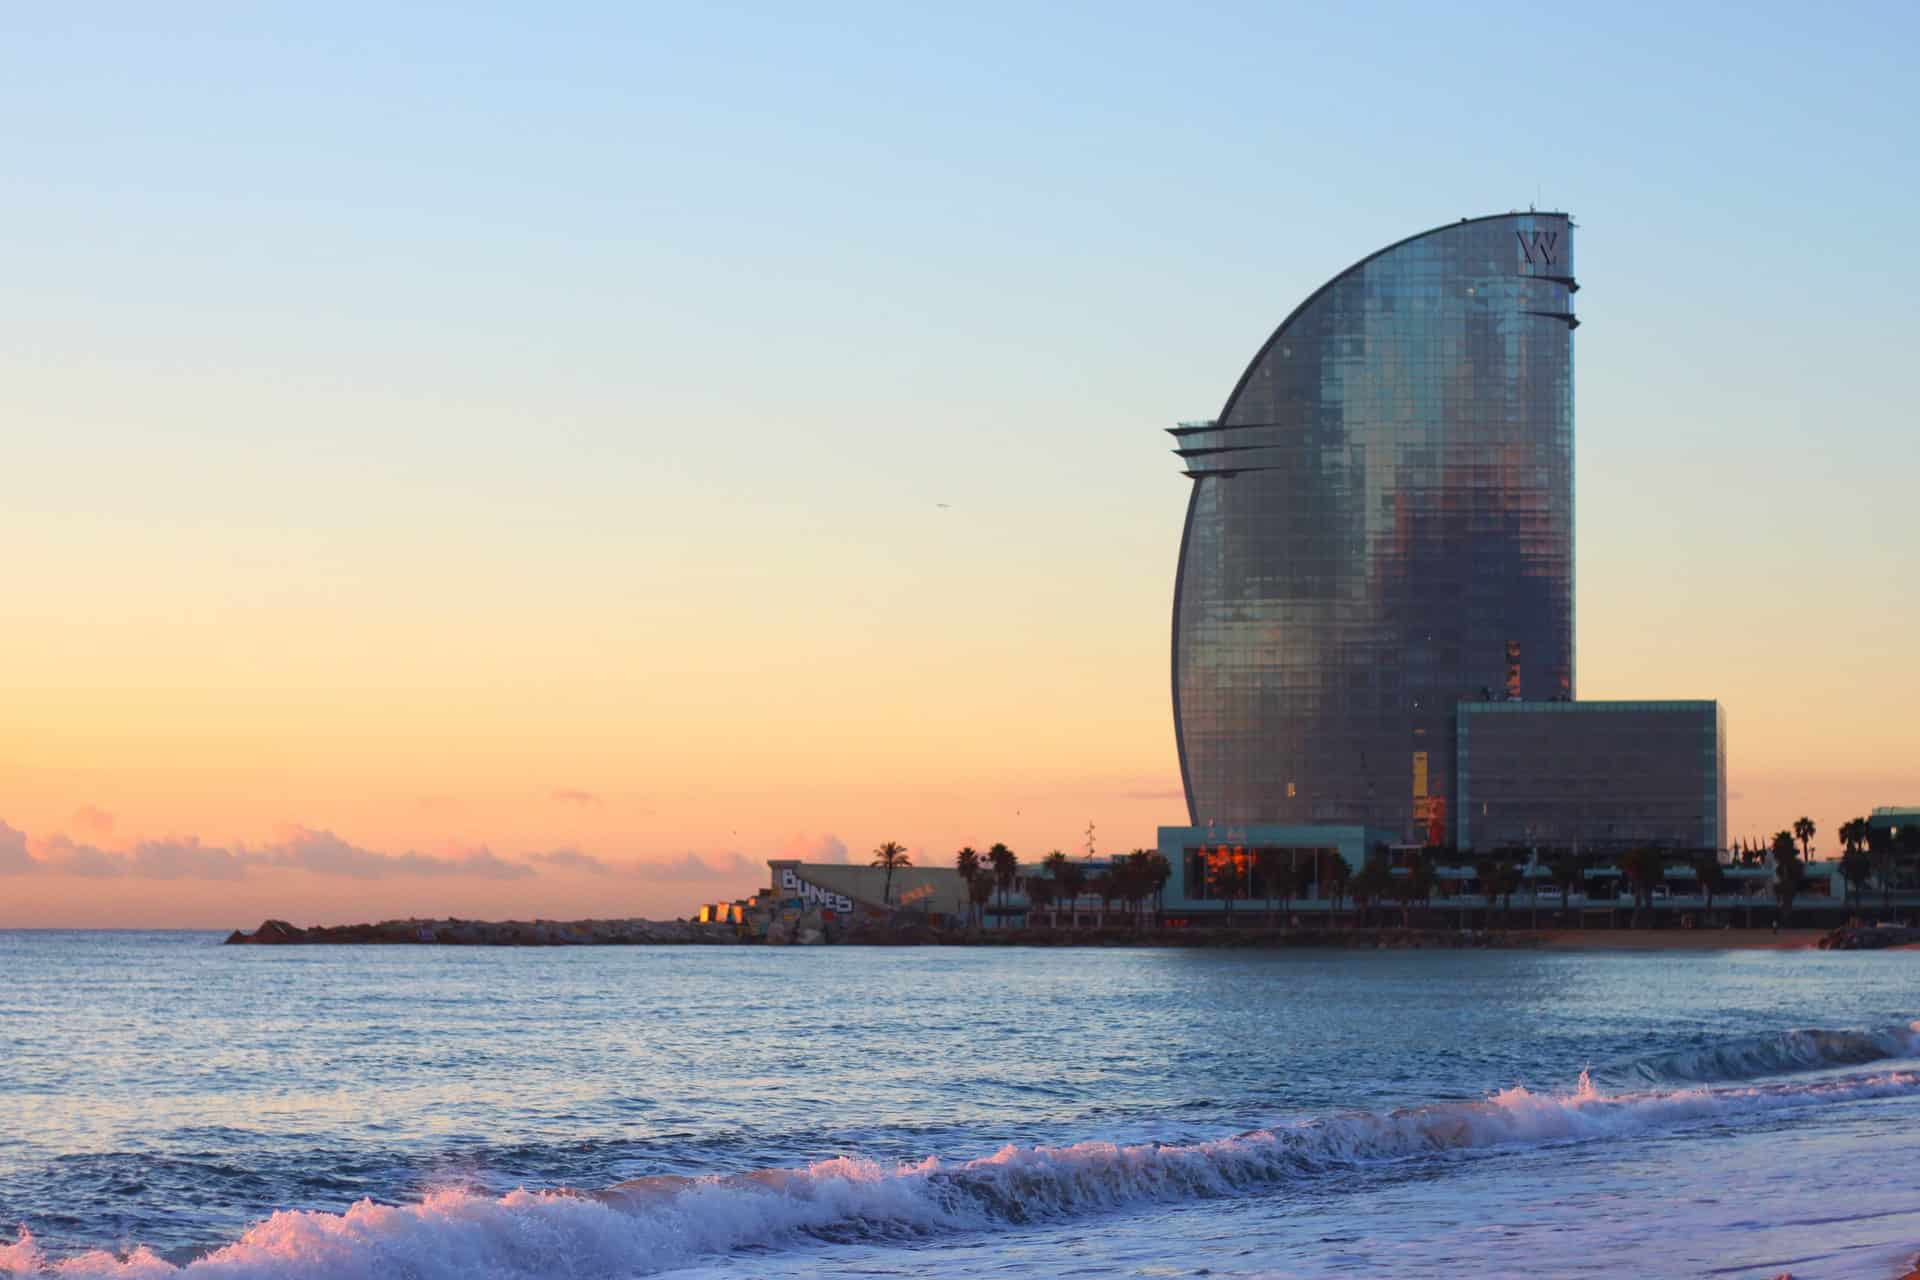 Home to Barcelona's most popular beaches, La Barceloneta is the best area to stay in Barcelona for a seaside holiday